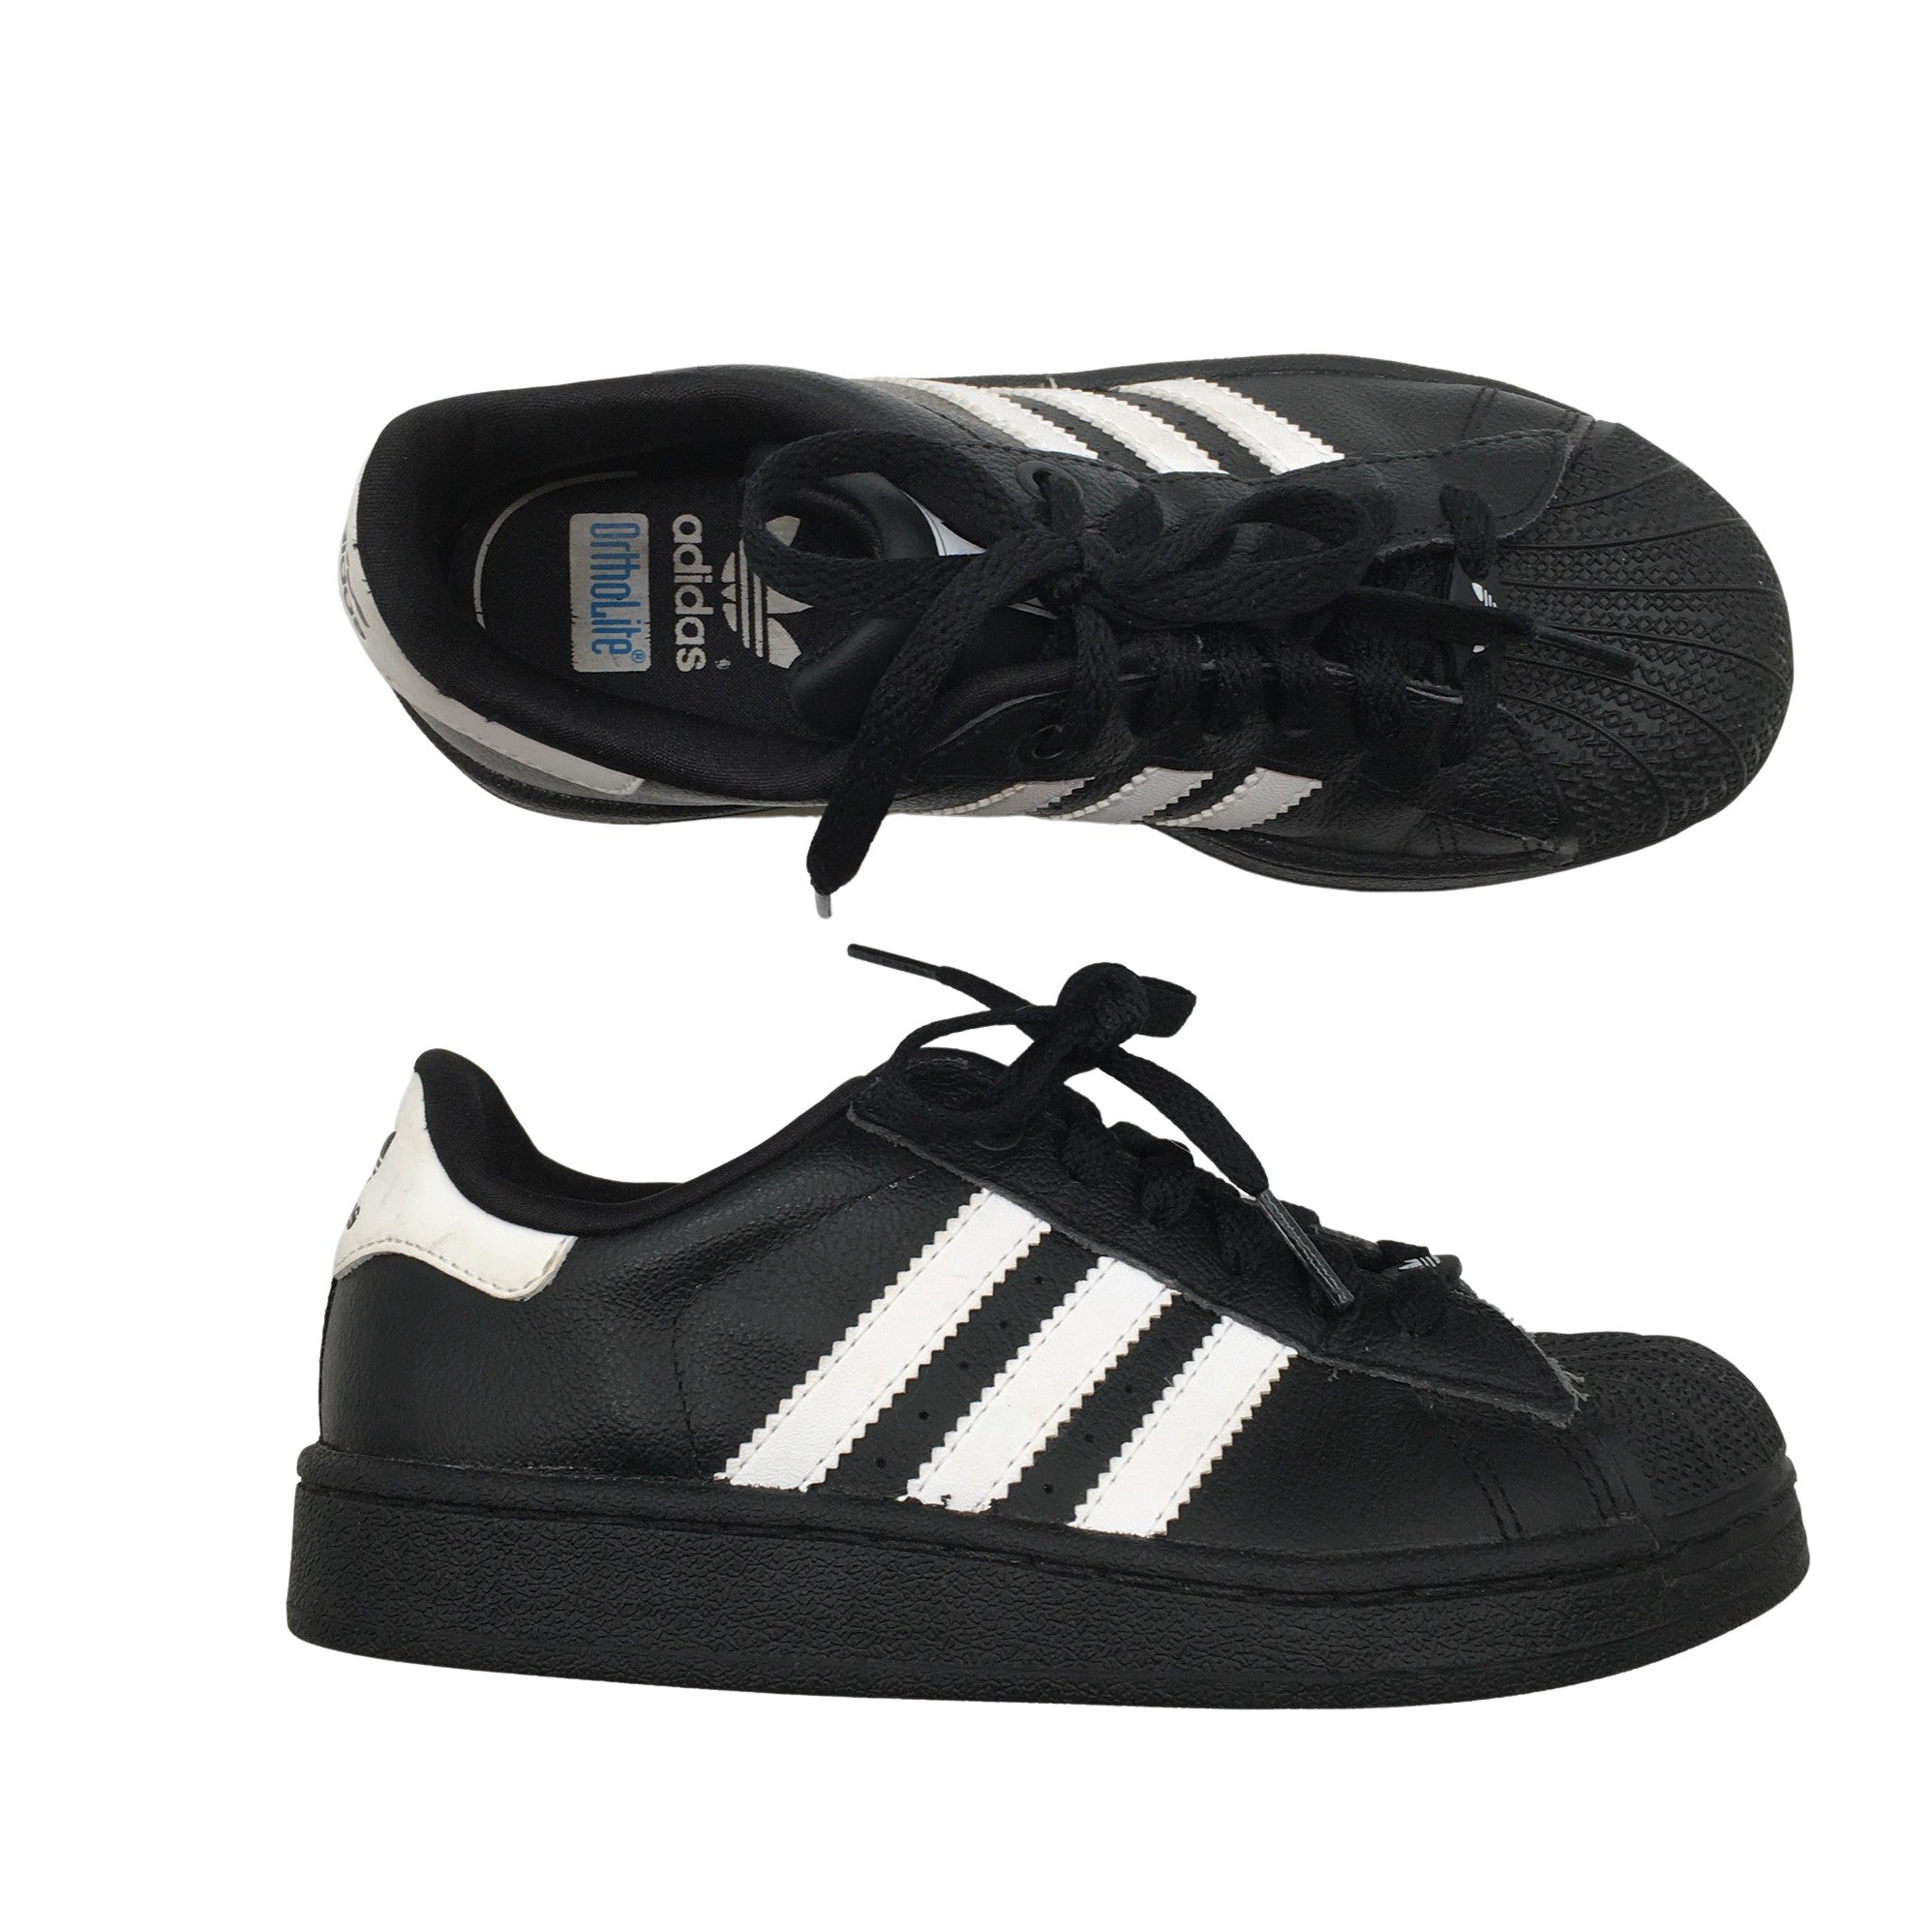 Unisex Adidas Casual sneakers, size 32 (Black) | Emmy